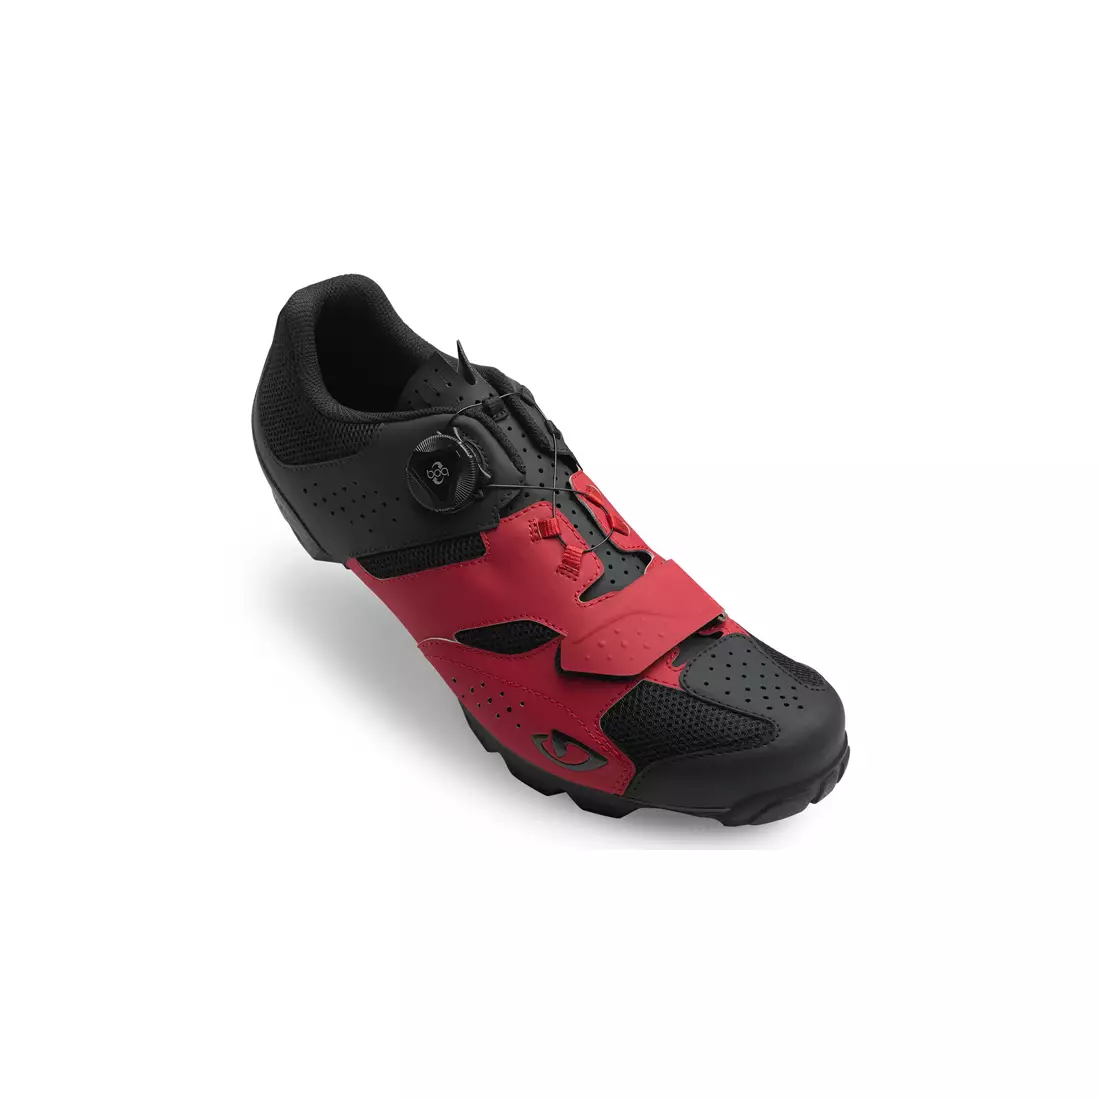 GIRO CYLINDER - Men's MTB cycling shoes black and red